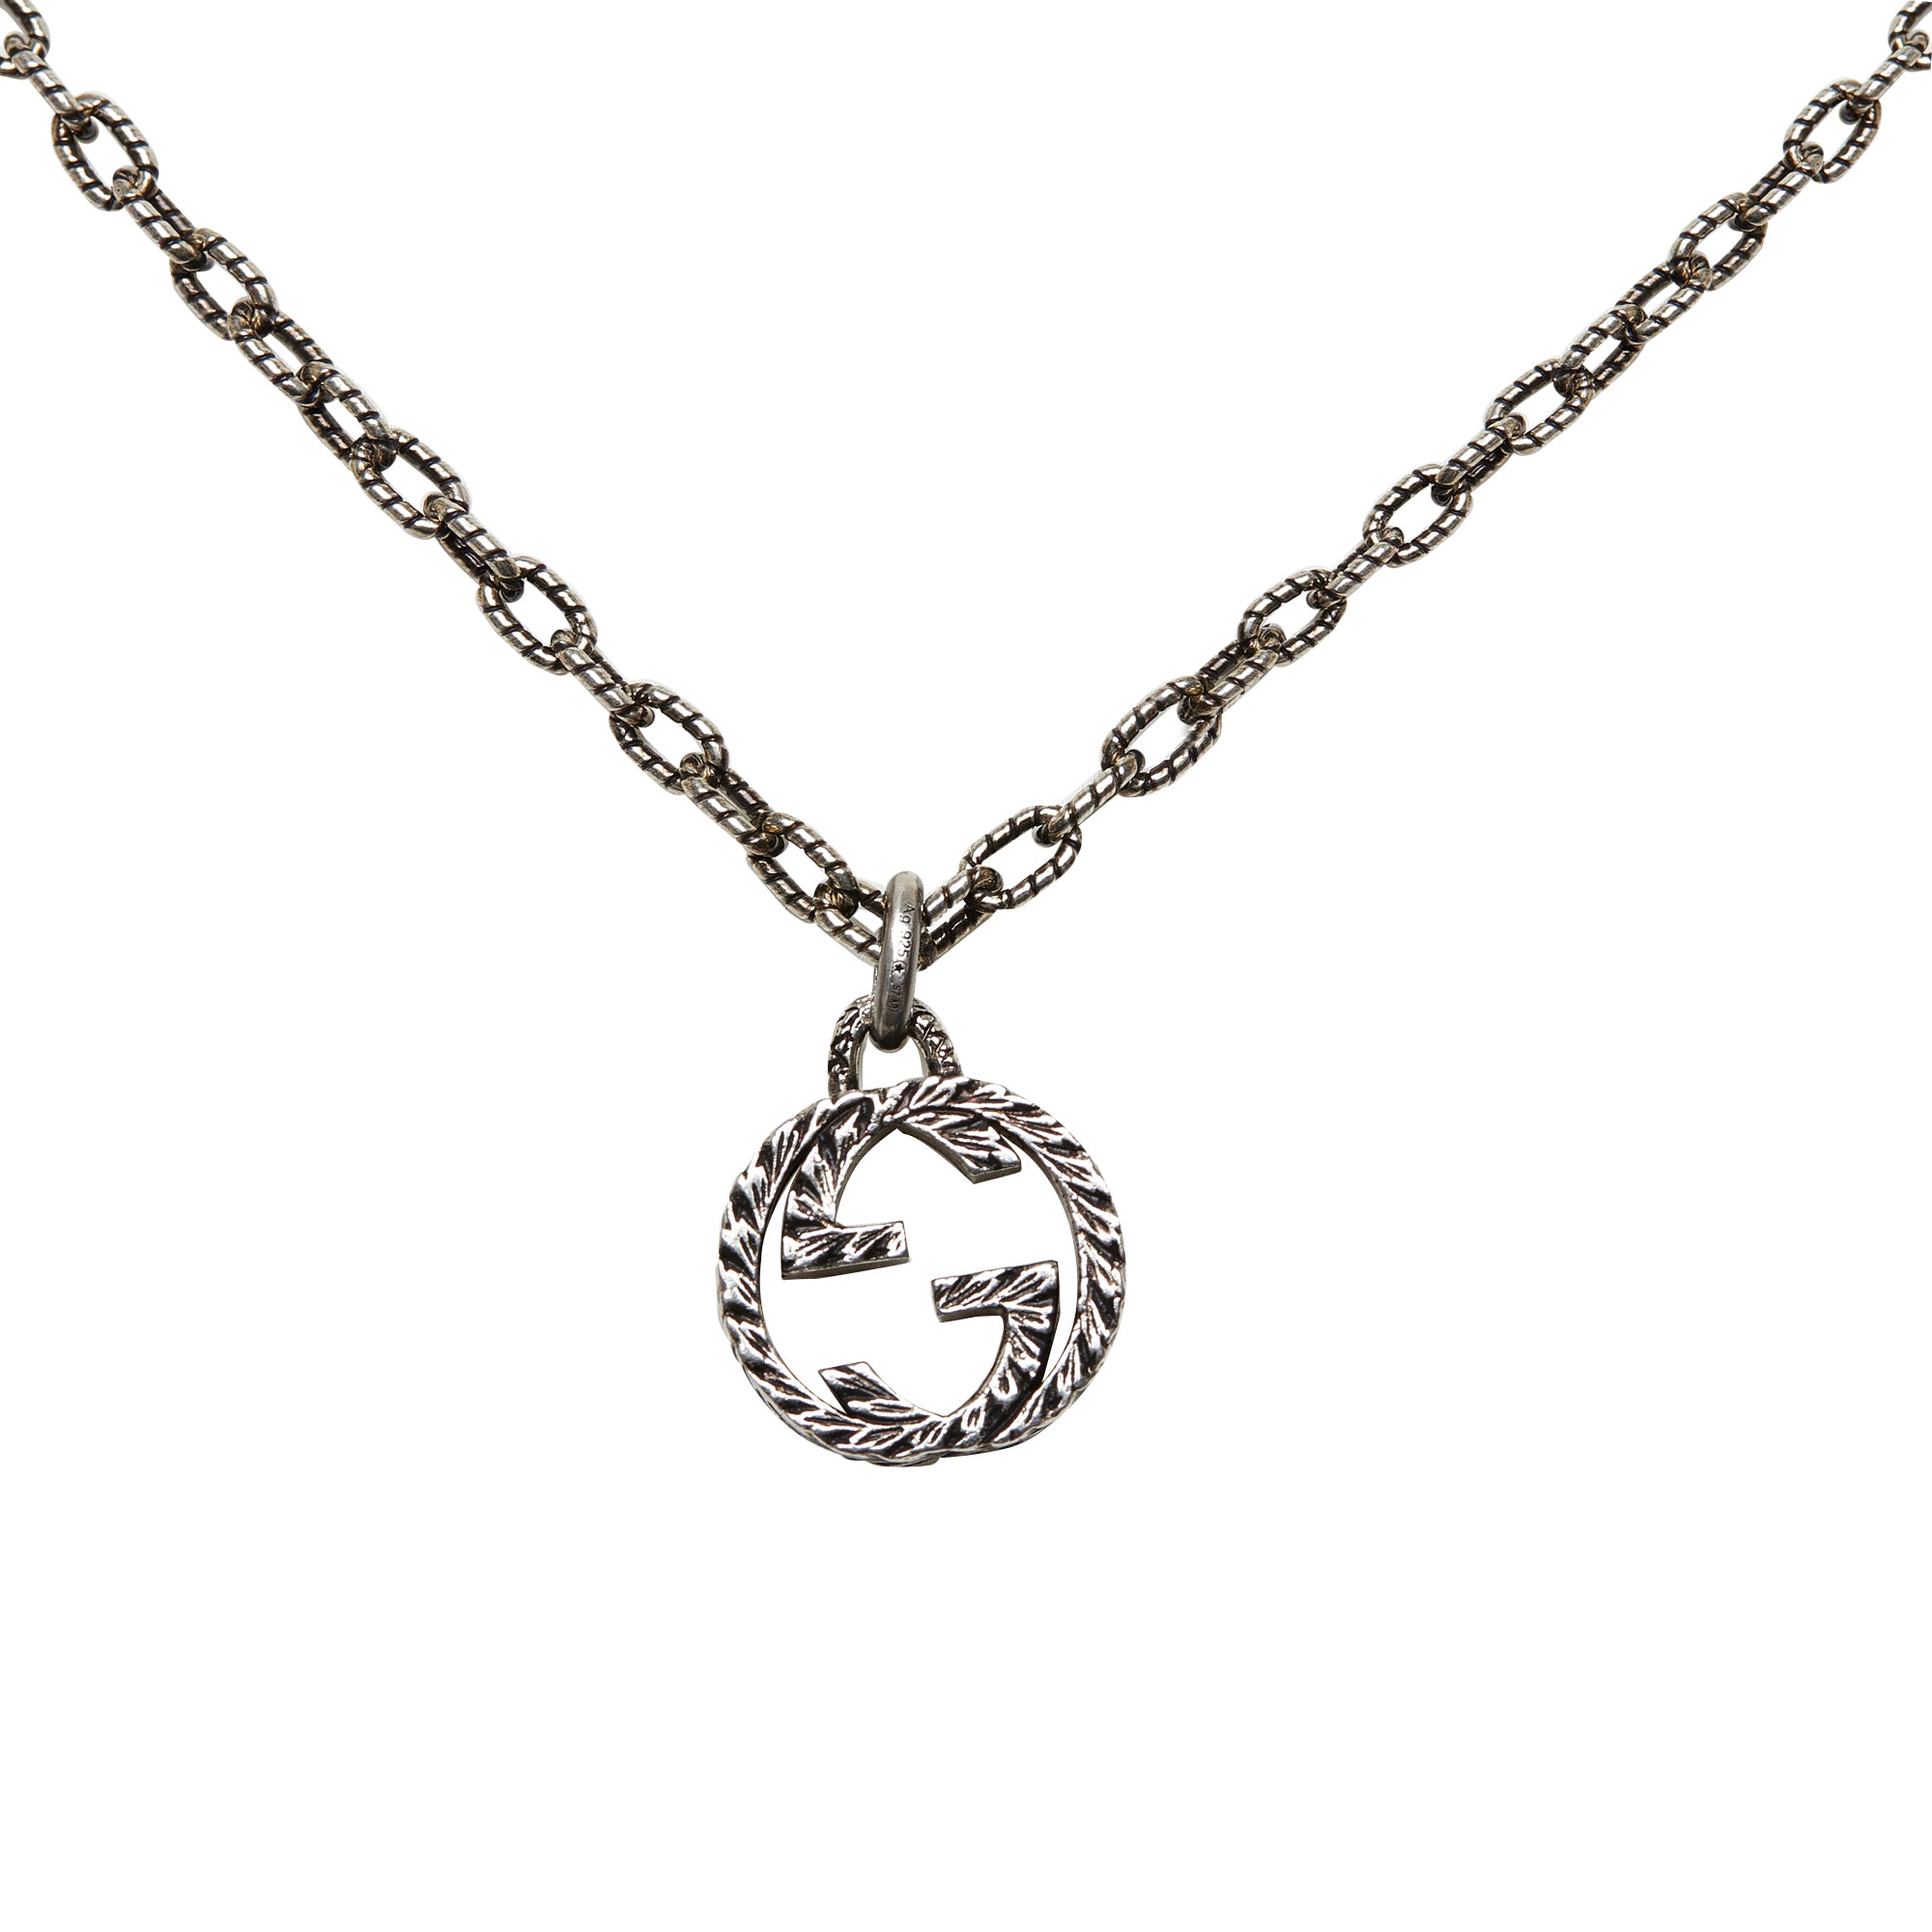 gold chanel logo necklace